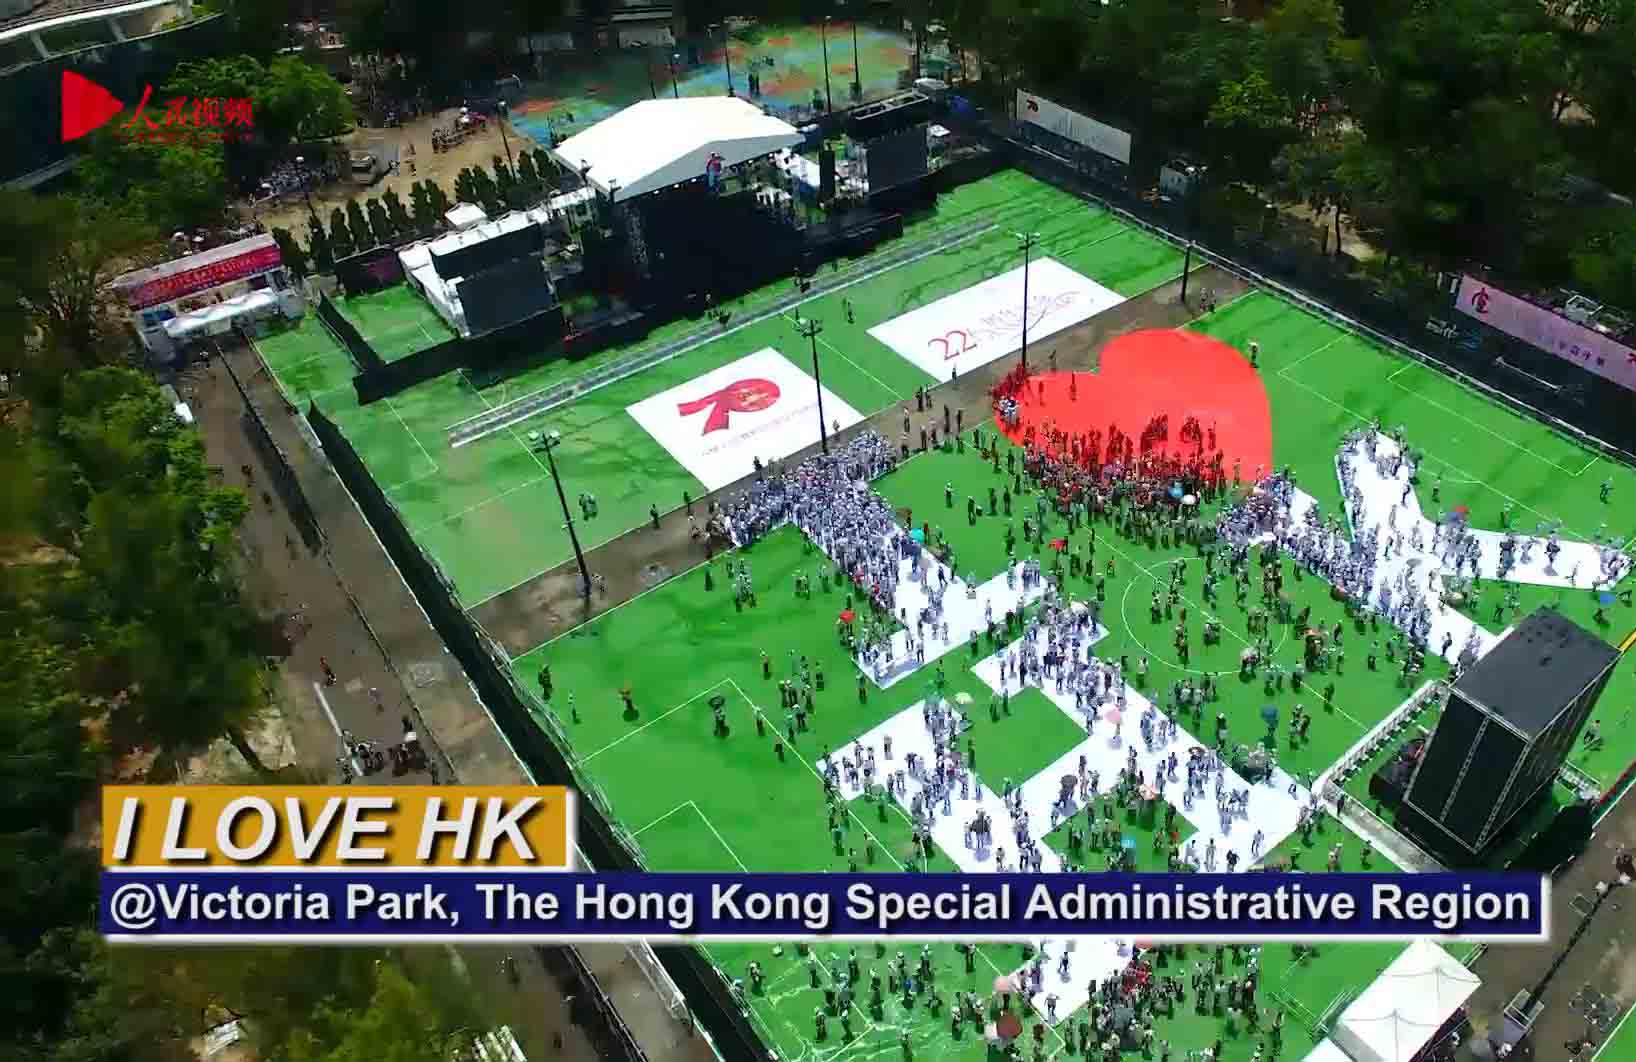 Thousands of citizens celebrate Hong Kong’s return to the motherland